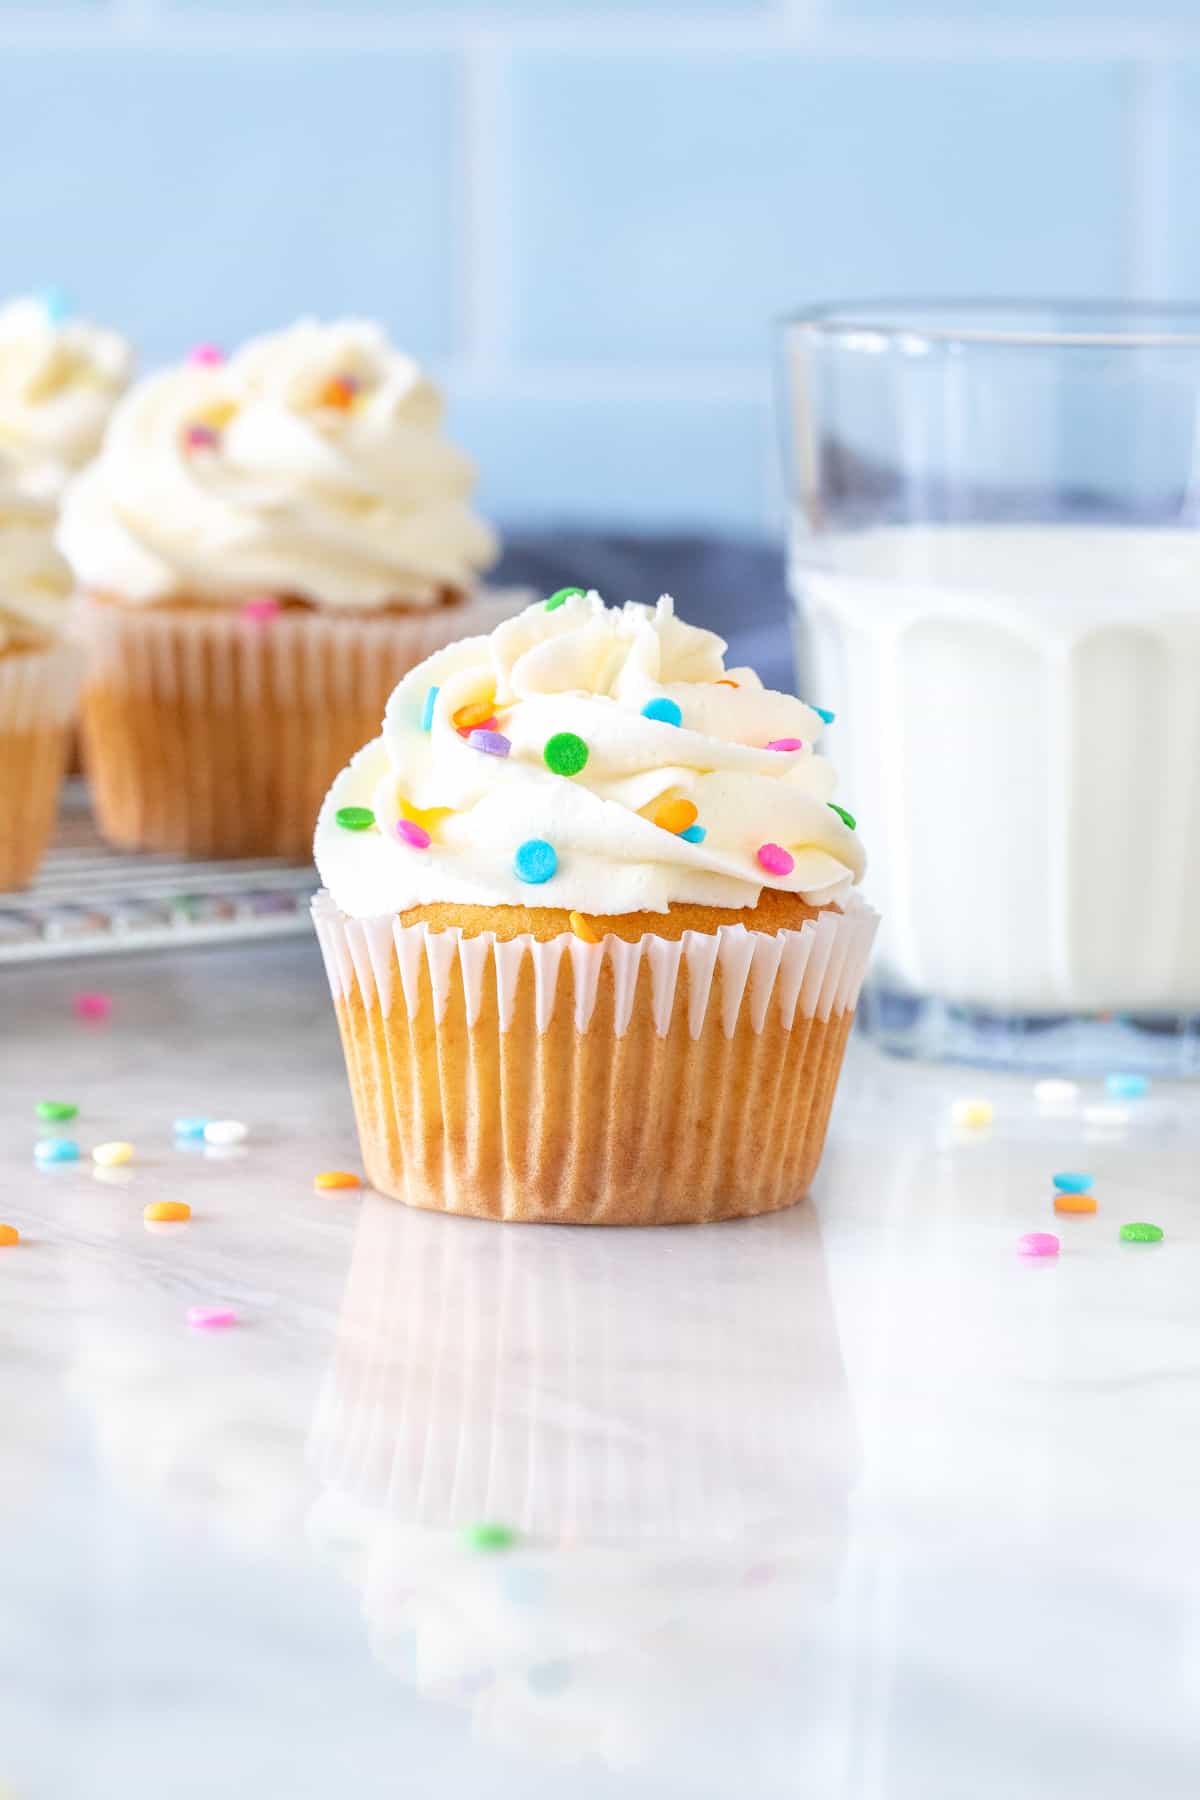 Cupcake with bright white frosting and glass of milk